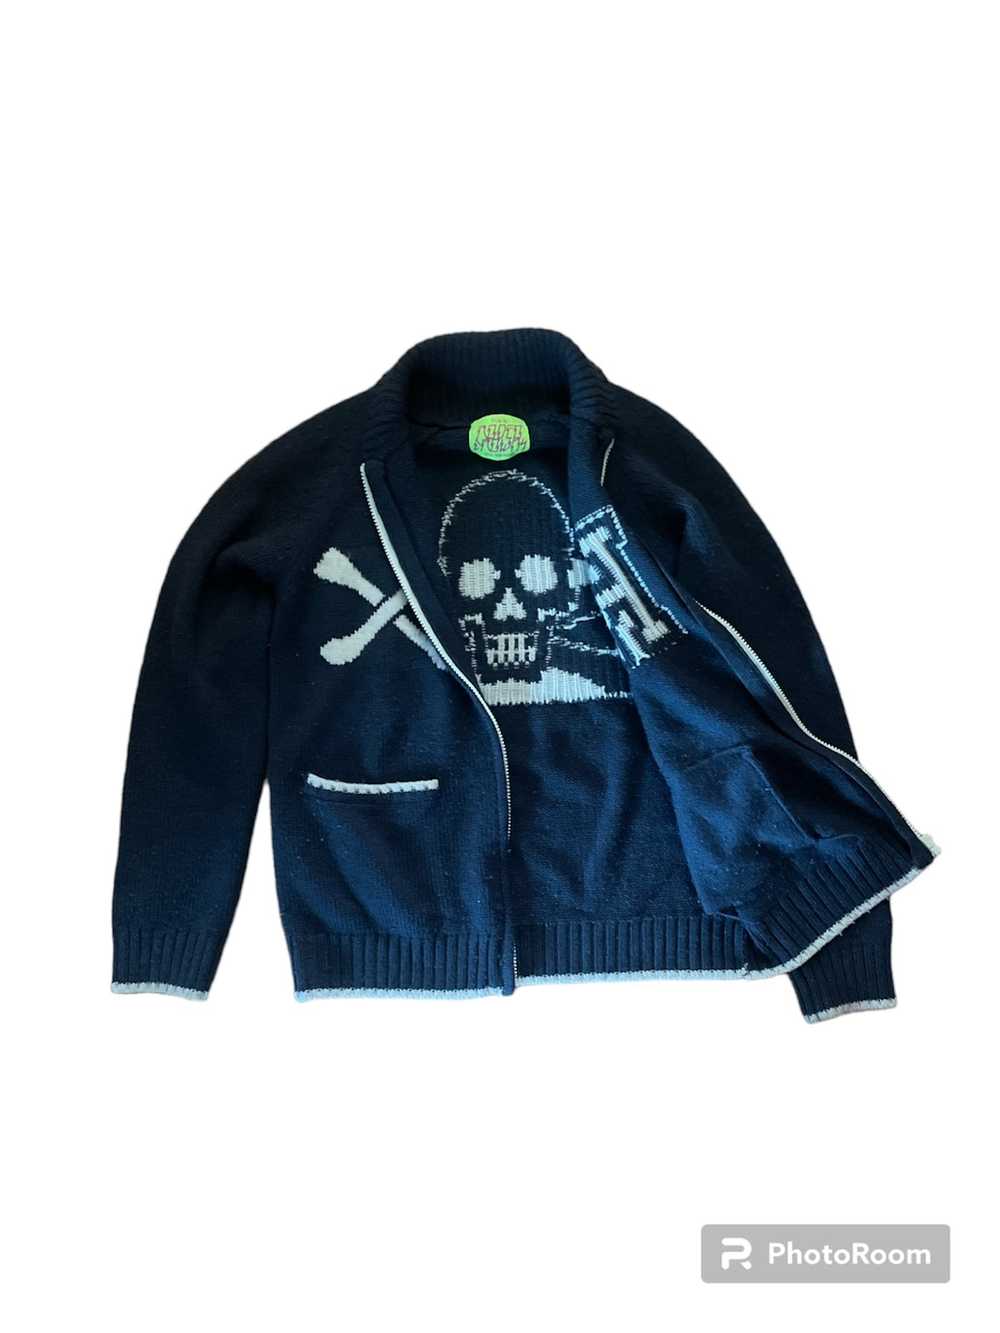 Hysteric Glamour × Japanese Brand skull knit zip - image 4